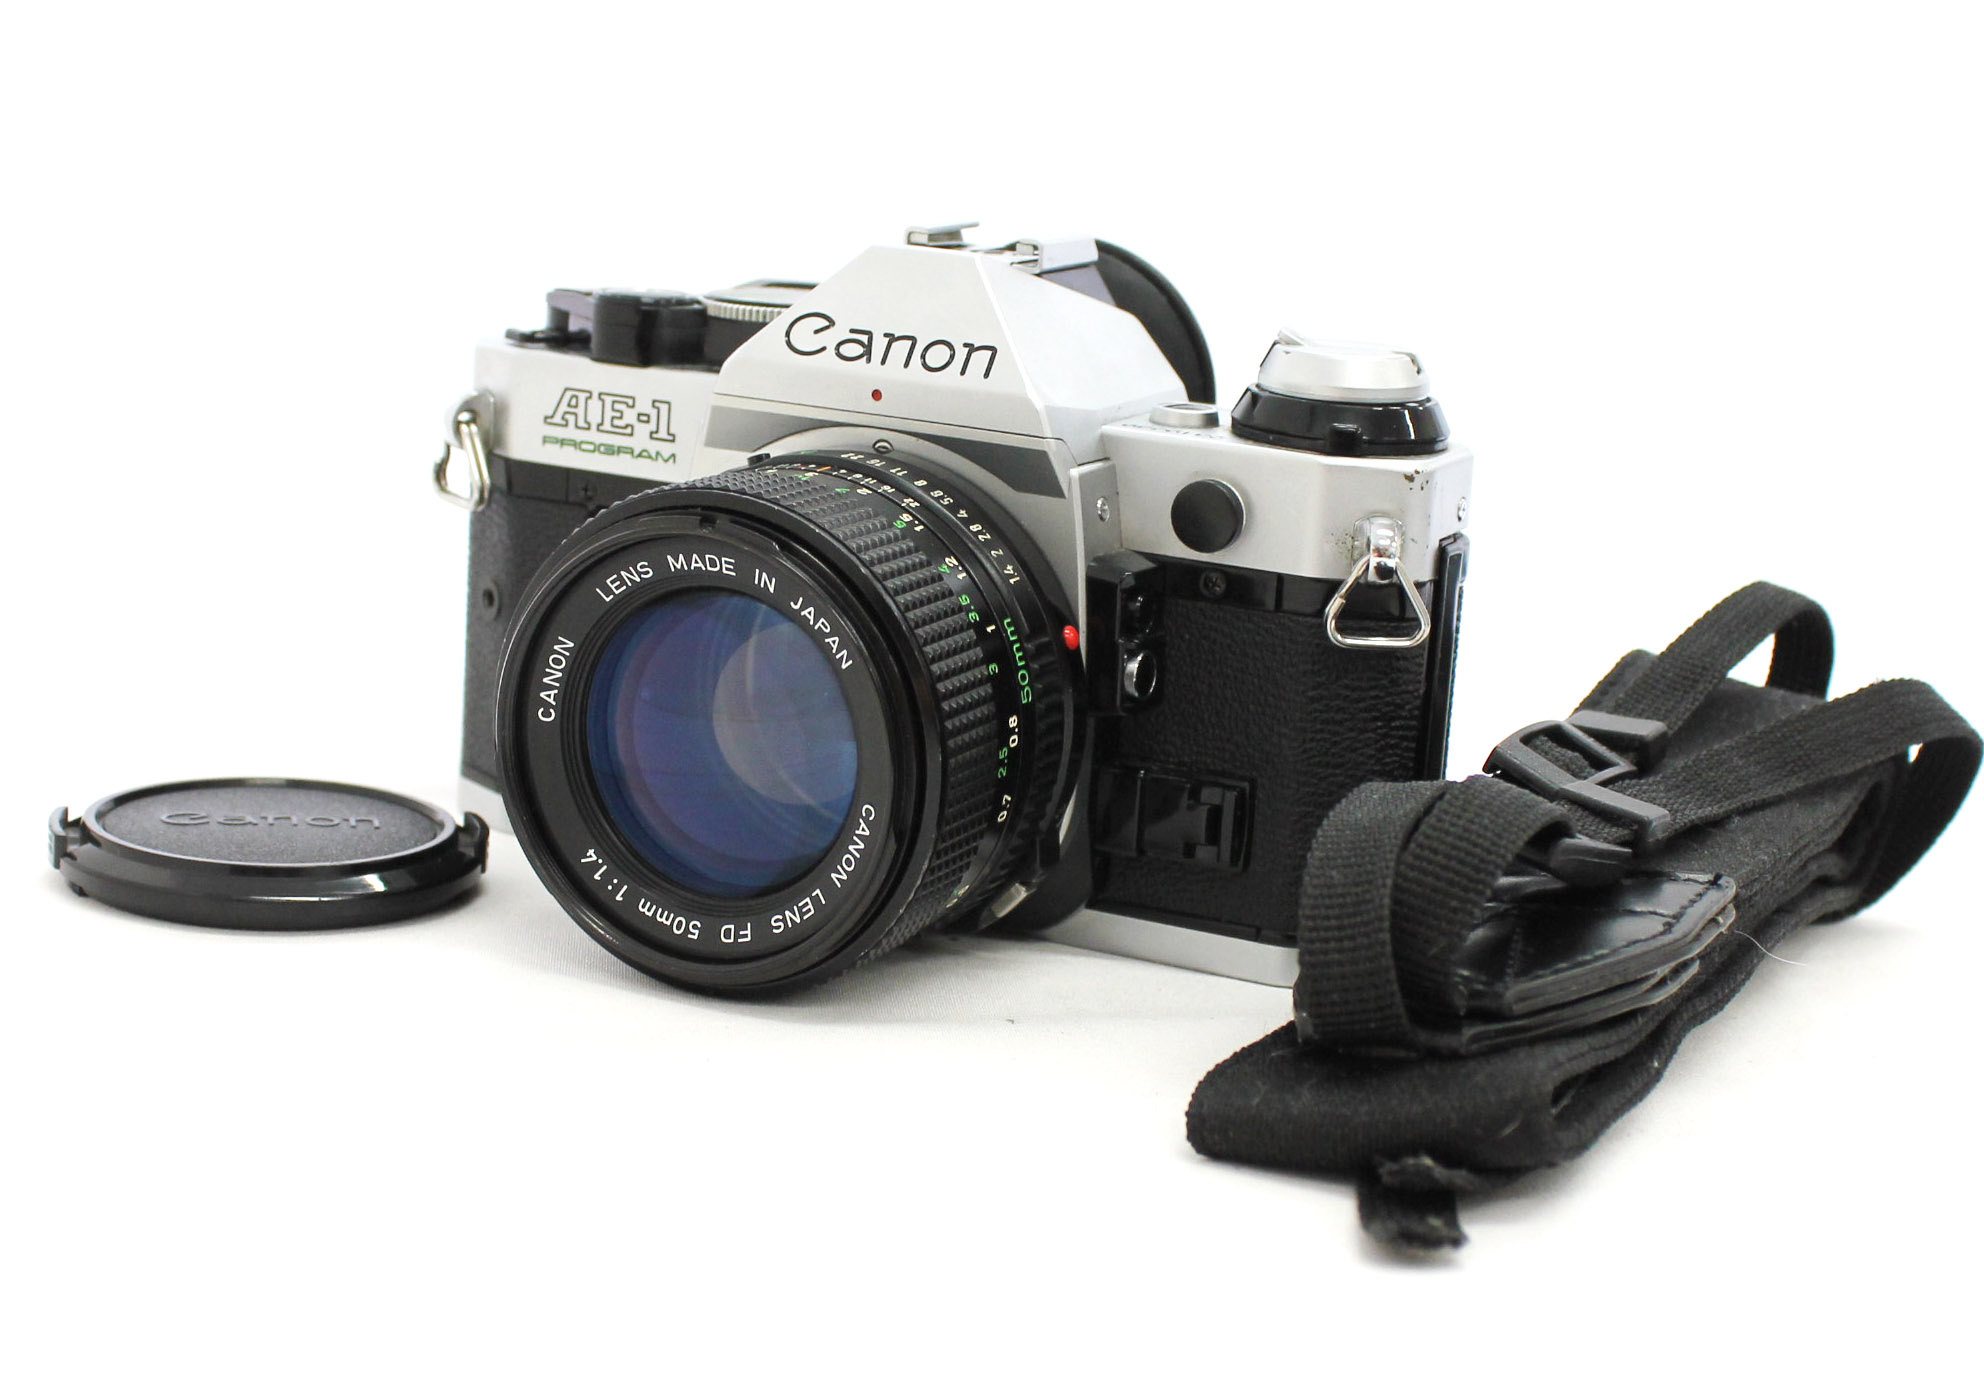 Japan Used Camera Shop | [Excellent+++++] Canon AE-1 Program 35mm SLR Film Camera with New FD NFD 50mm F/1.4 Lens from Japan